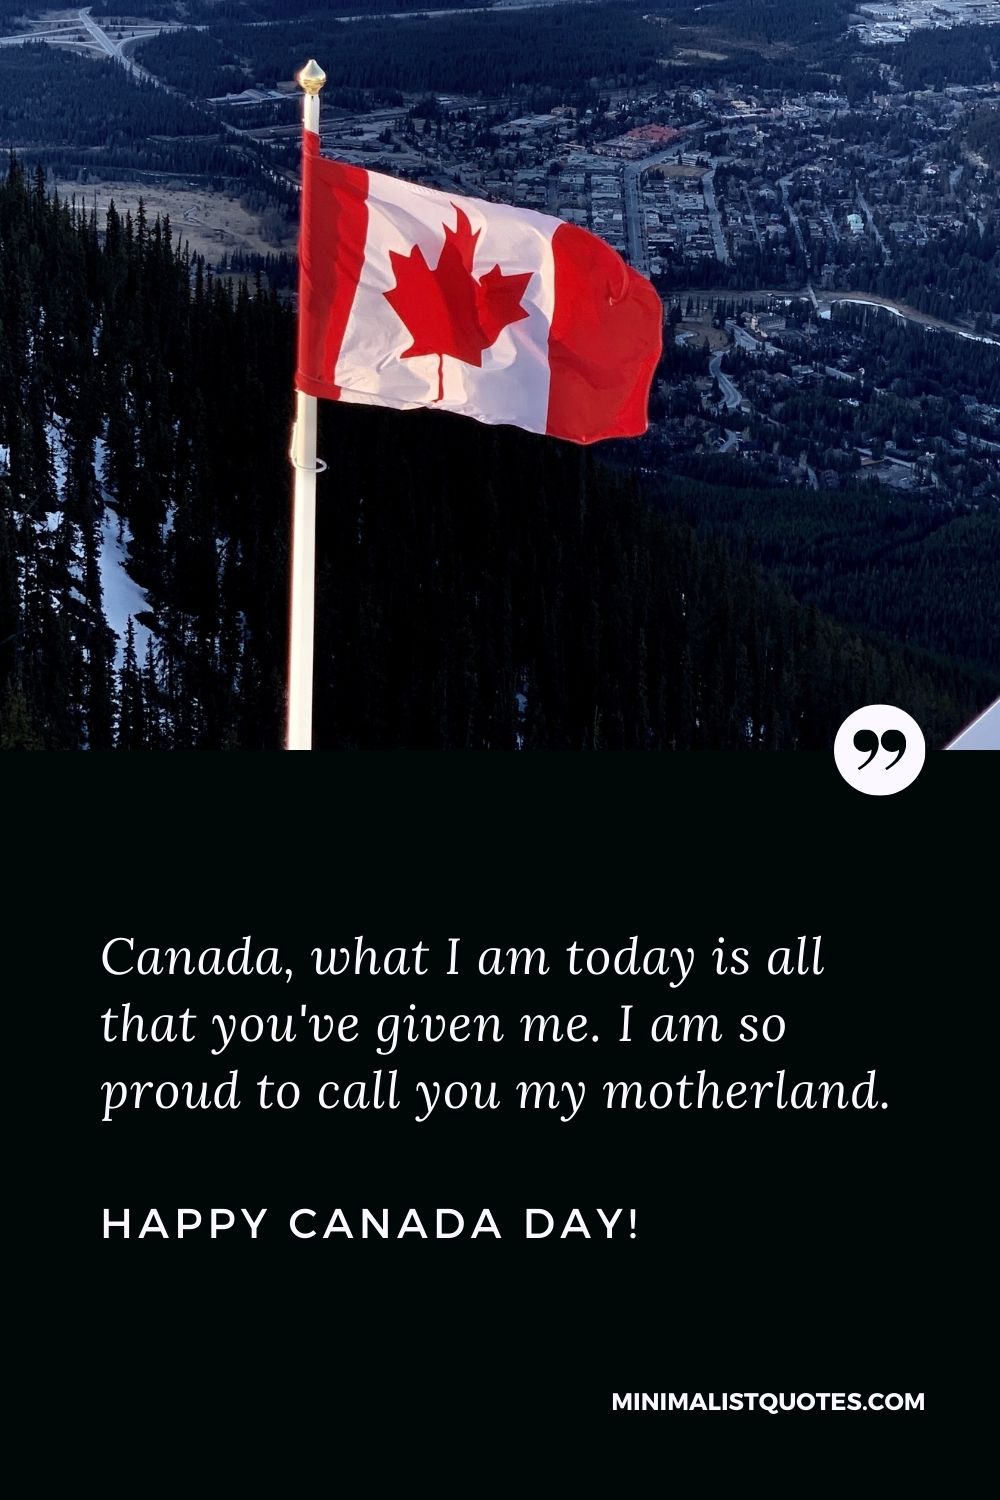 Remembrance day quotes Canada: Canada, what I am today is all that you've given me. I am so proud to call you my motherland. Happy Canada day!